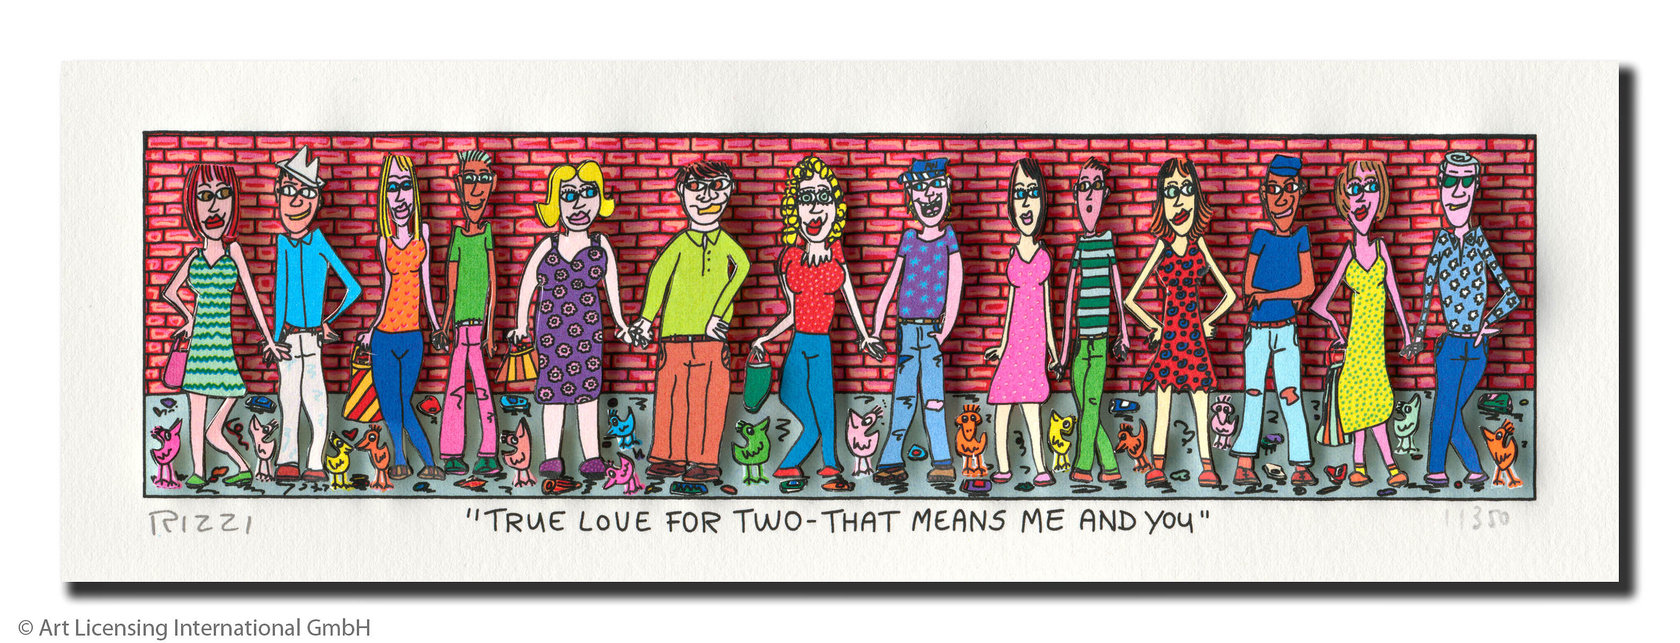 James Rizzi - TRUE LOVE FOR TWO - THAT MEANS ME AND YOU